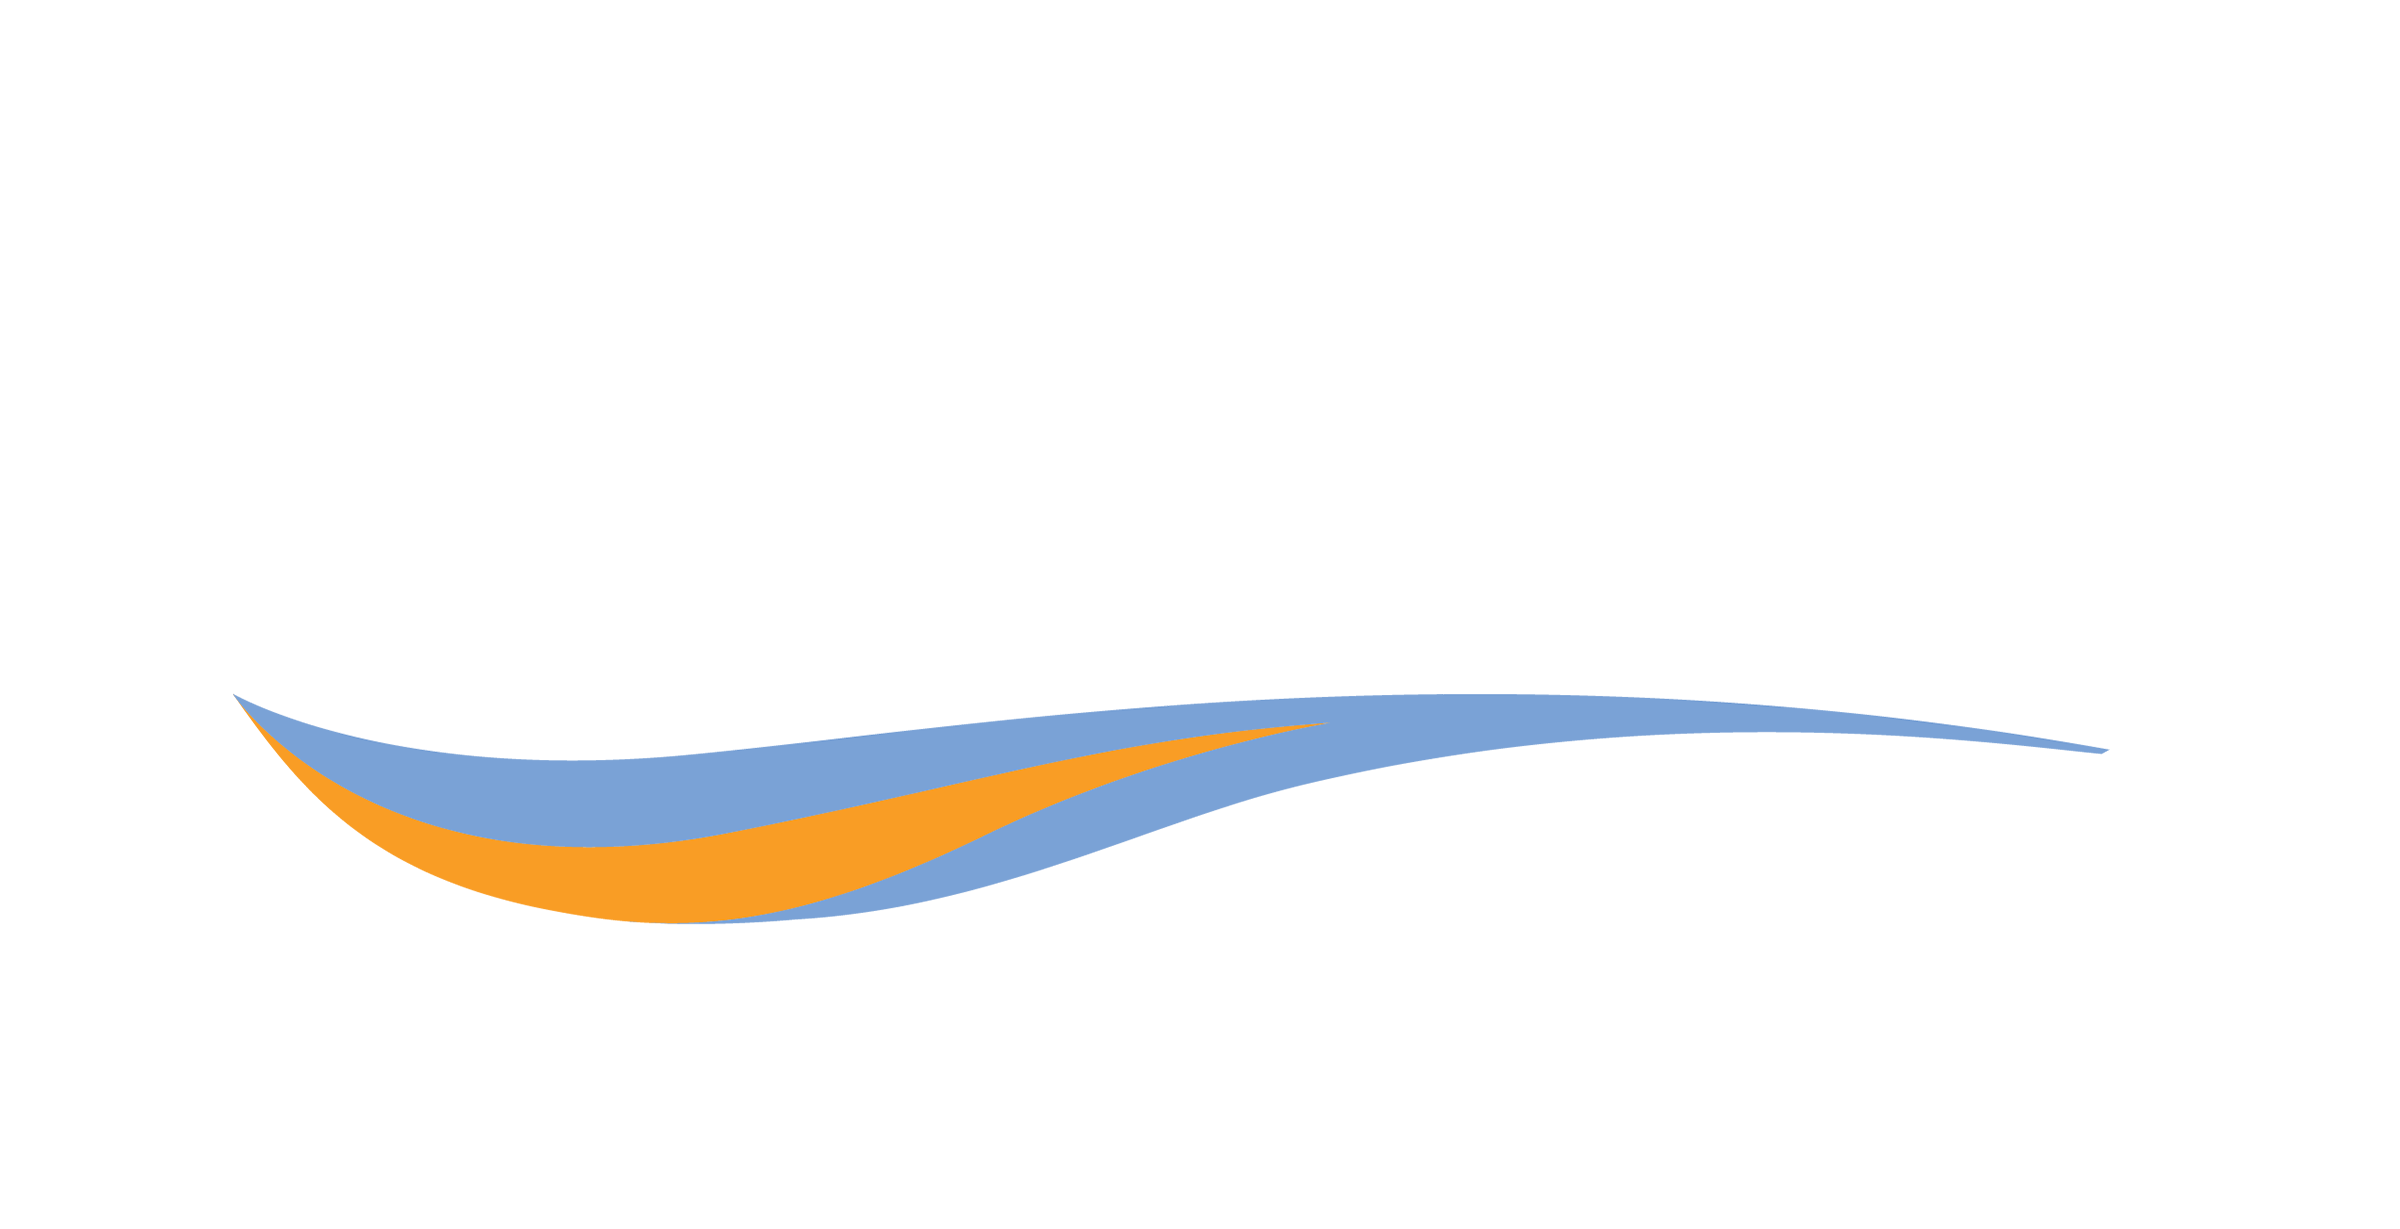 Axius Water: Shortlisted for Water Technology Company of the Year